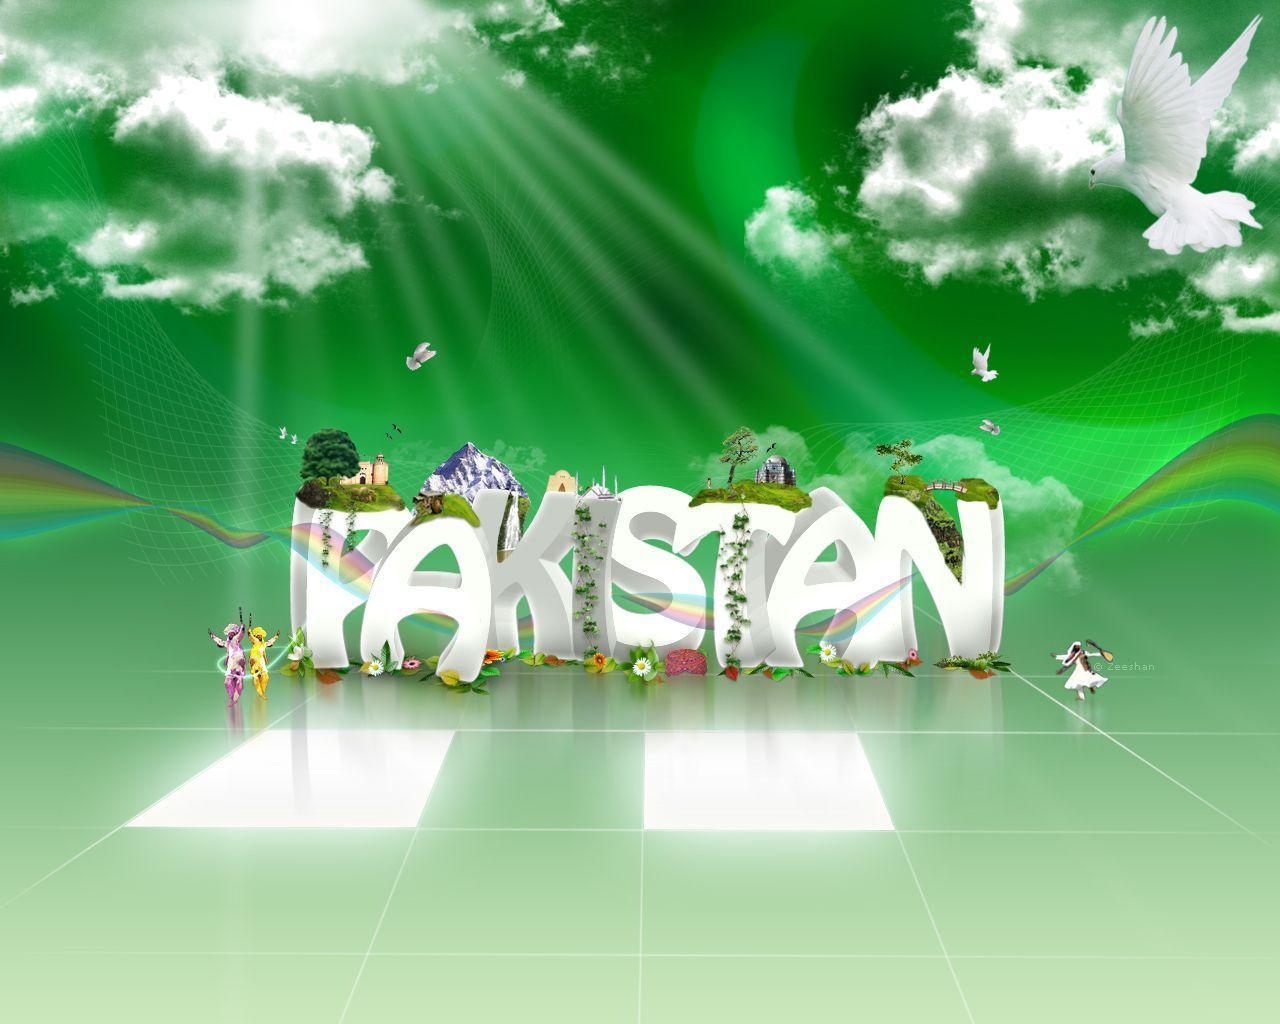 Pakistani Flag Wallpaper Picture Gallery